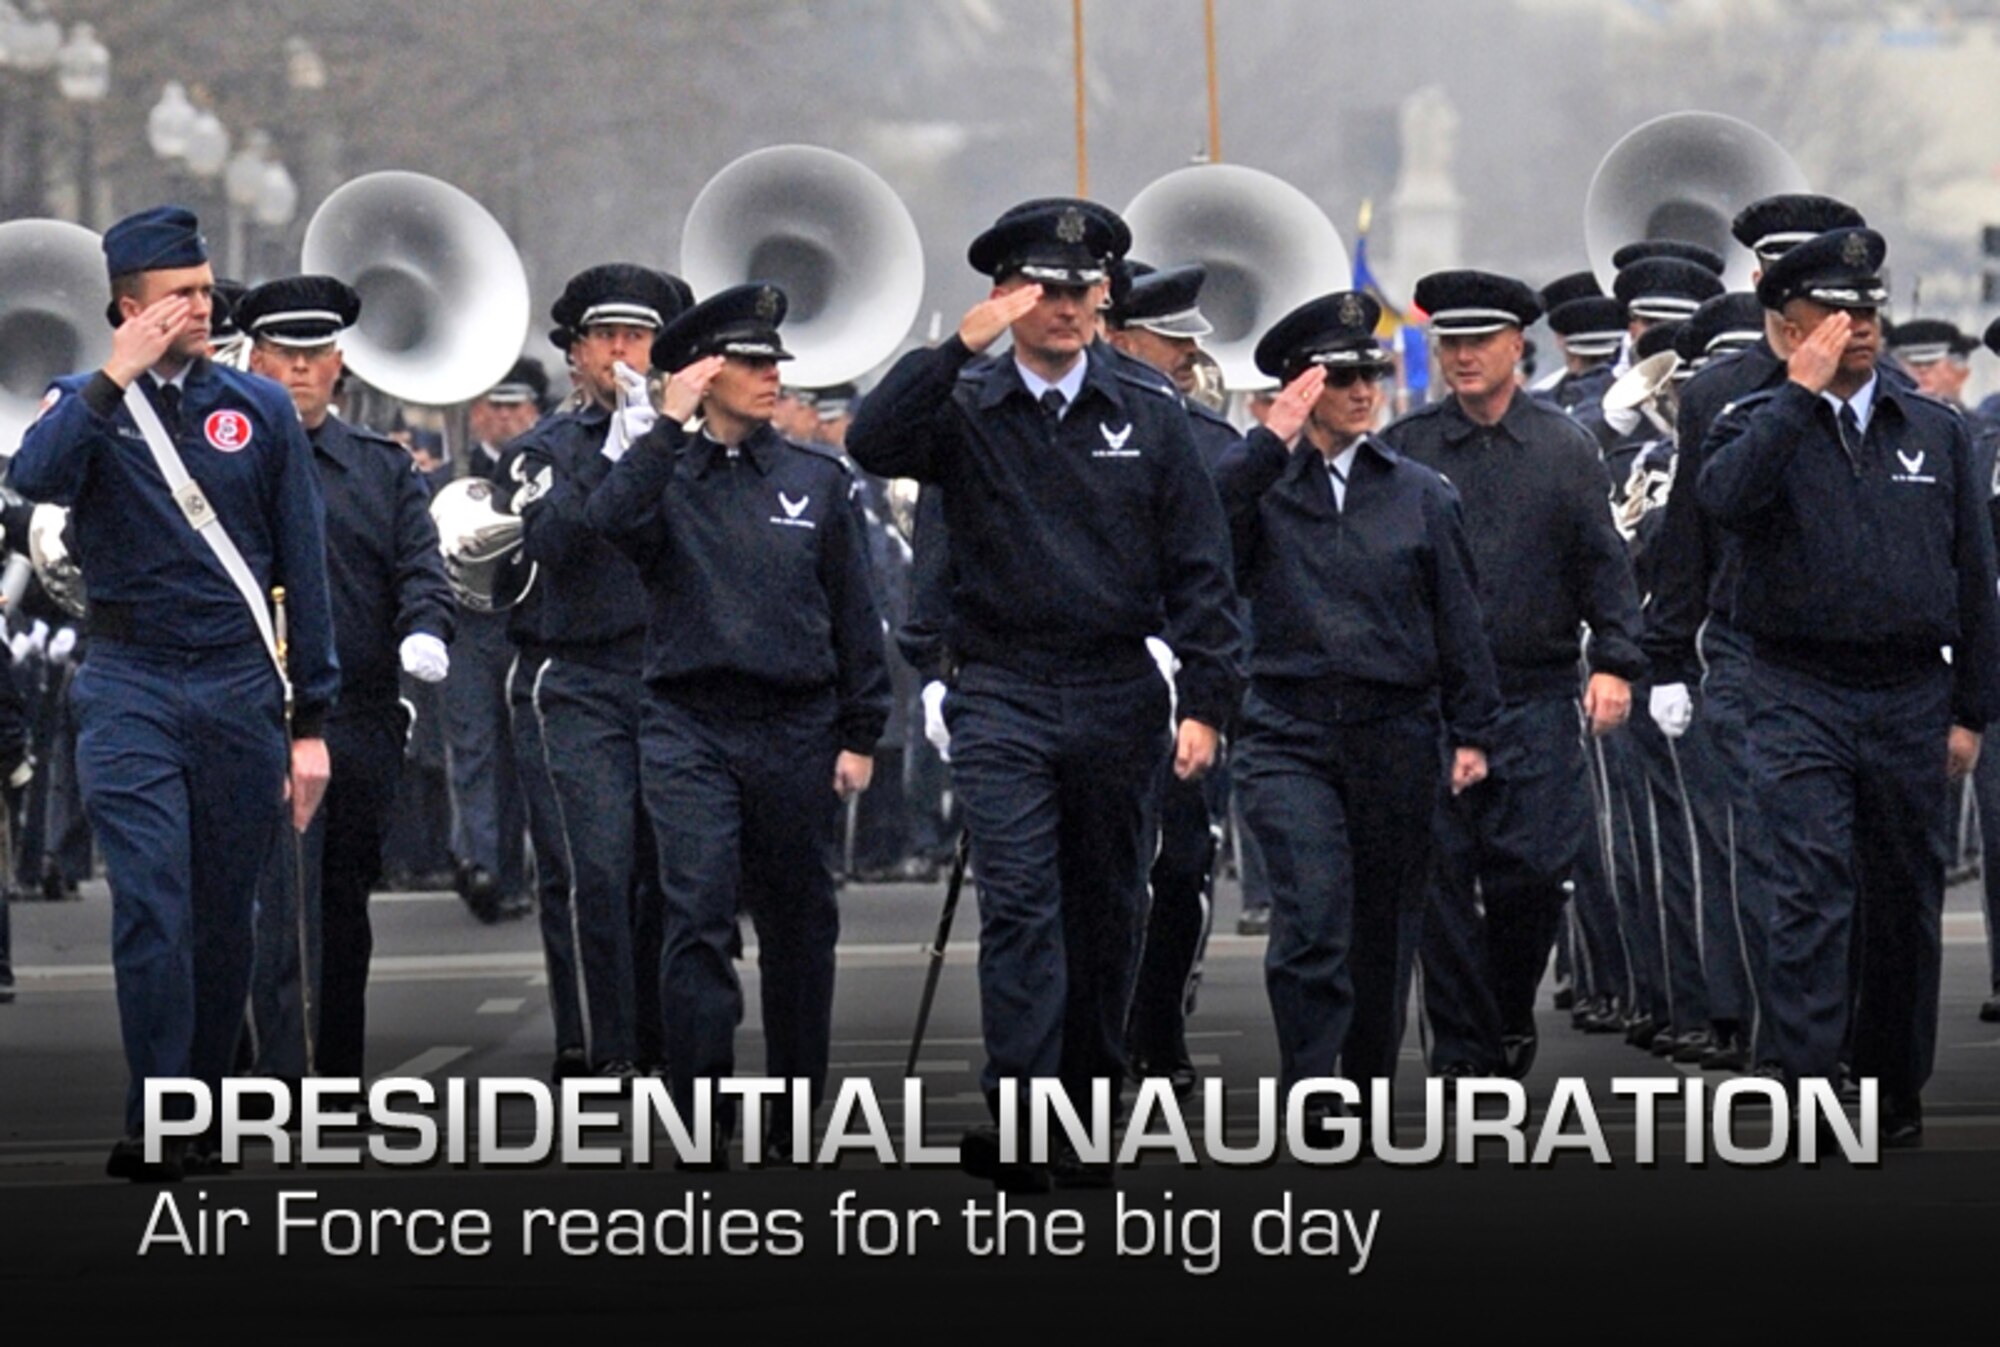 The United States Air Force Band marches along Pennsylvania Ave. during the inauguration practice January 13, 2012 in Washington D.C. Department of Defense photo by EJ Hersom